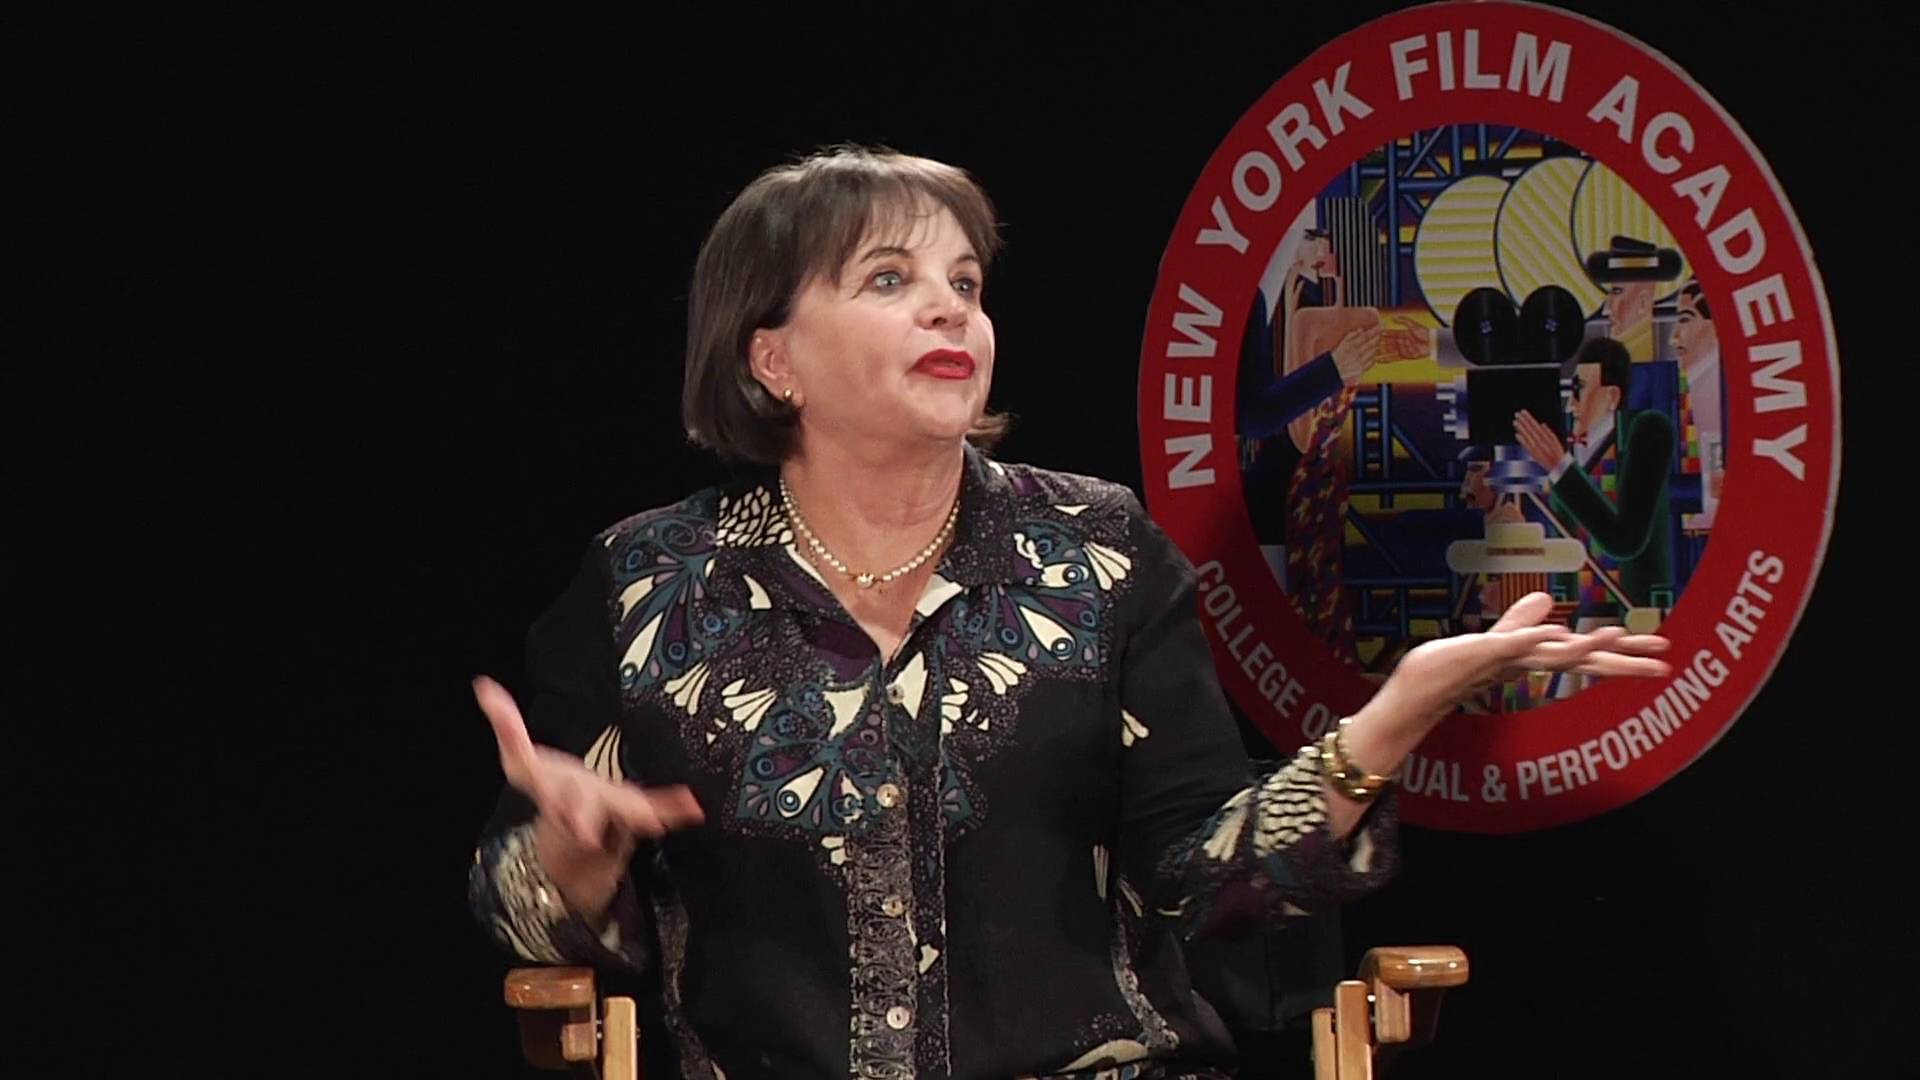 Discussion with Actress Cindy Williams at New York Film Academy